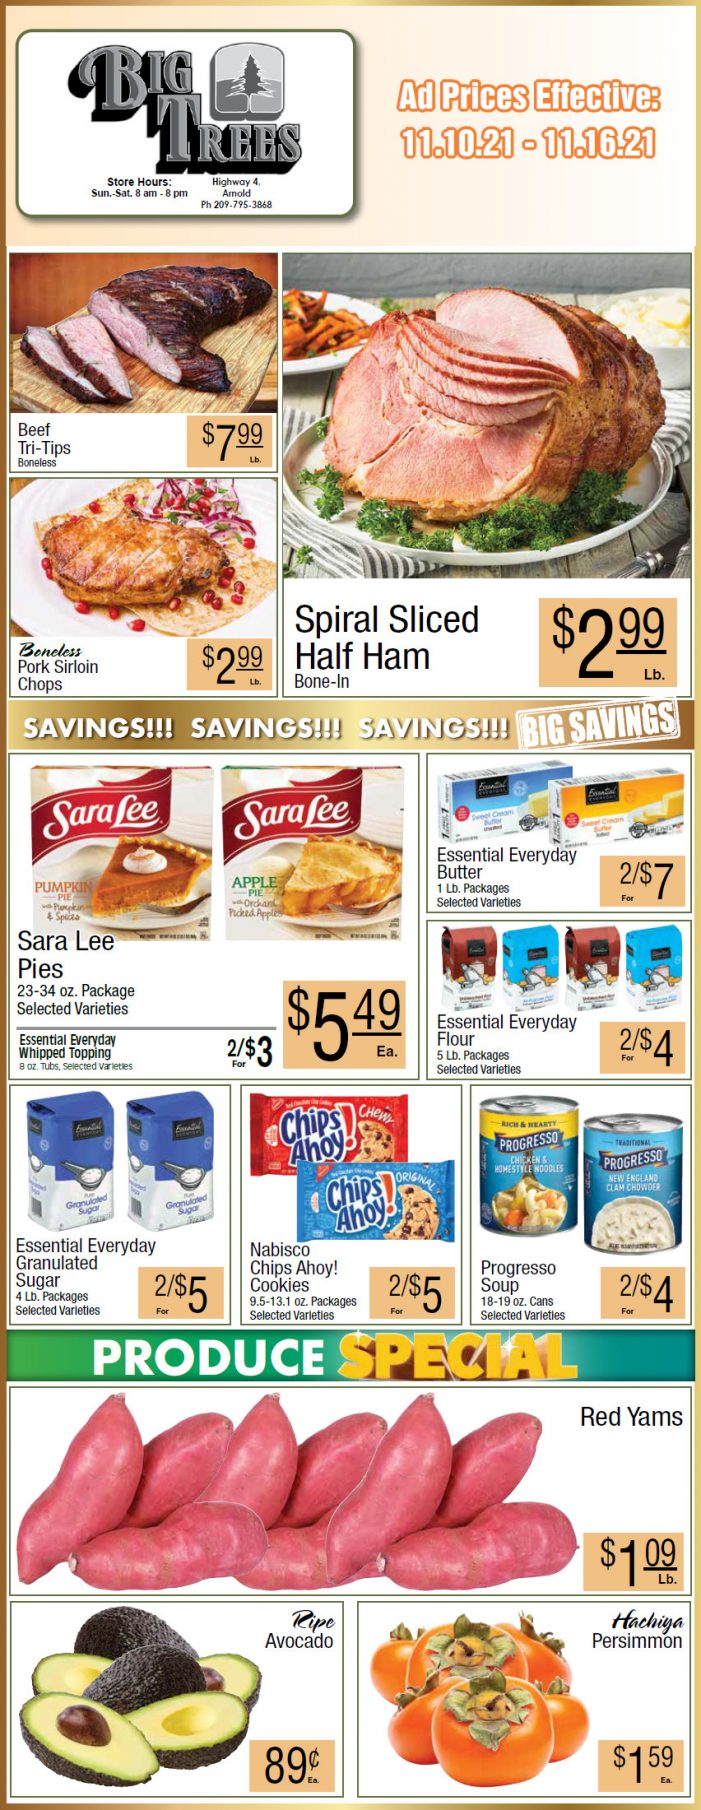 Big Trees Market Weekly Ad & Grocery Specials Through November 16th! Shop Local & Save!!